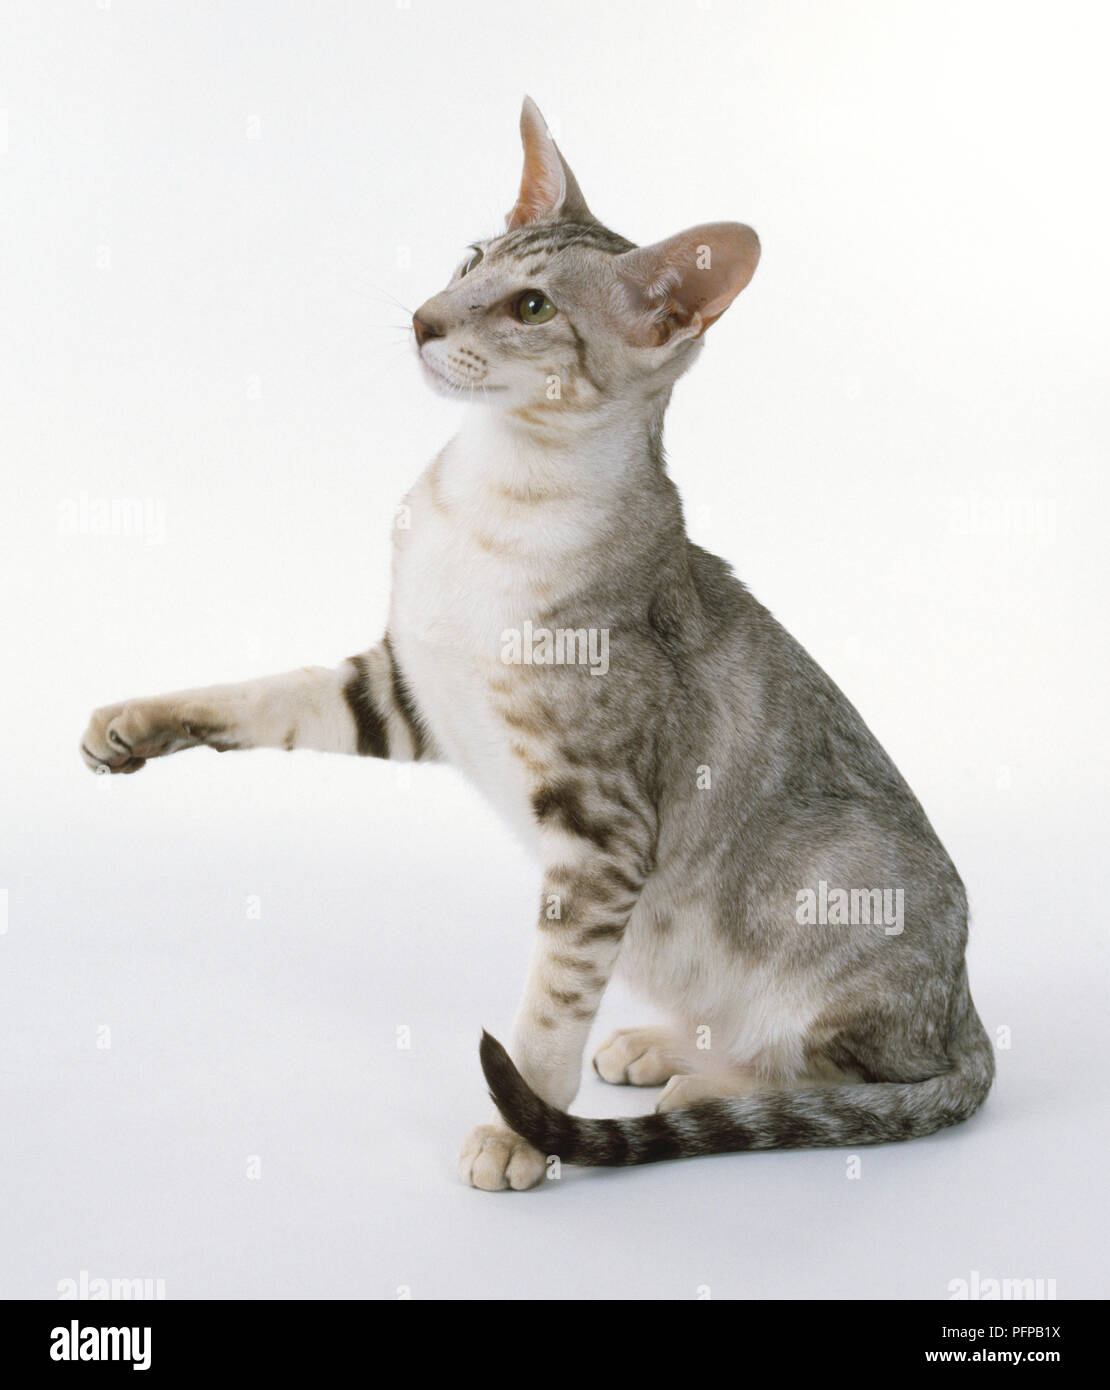 Chocolate Silver Classic Tabby Oriental shorthaired cat with sleek appearance and slims legs with small oval paws, sitting, extending right fore paw. Stock Photo